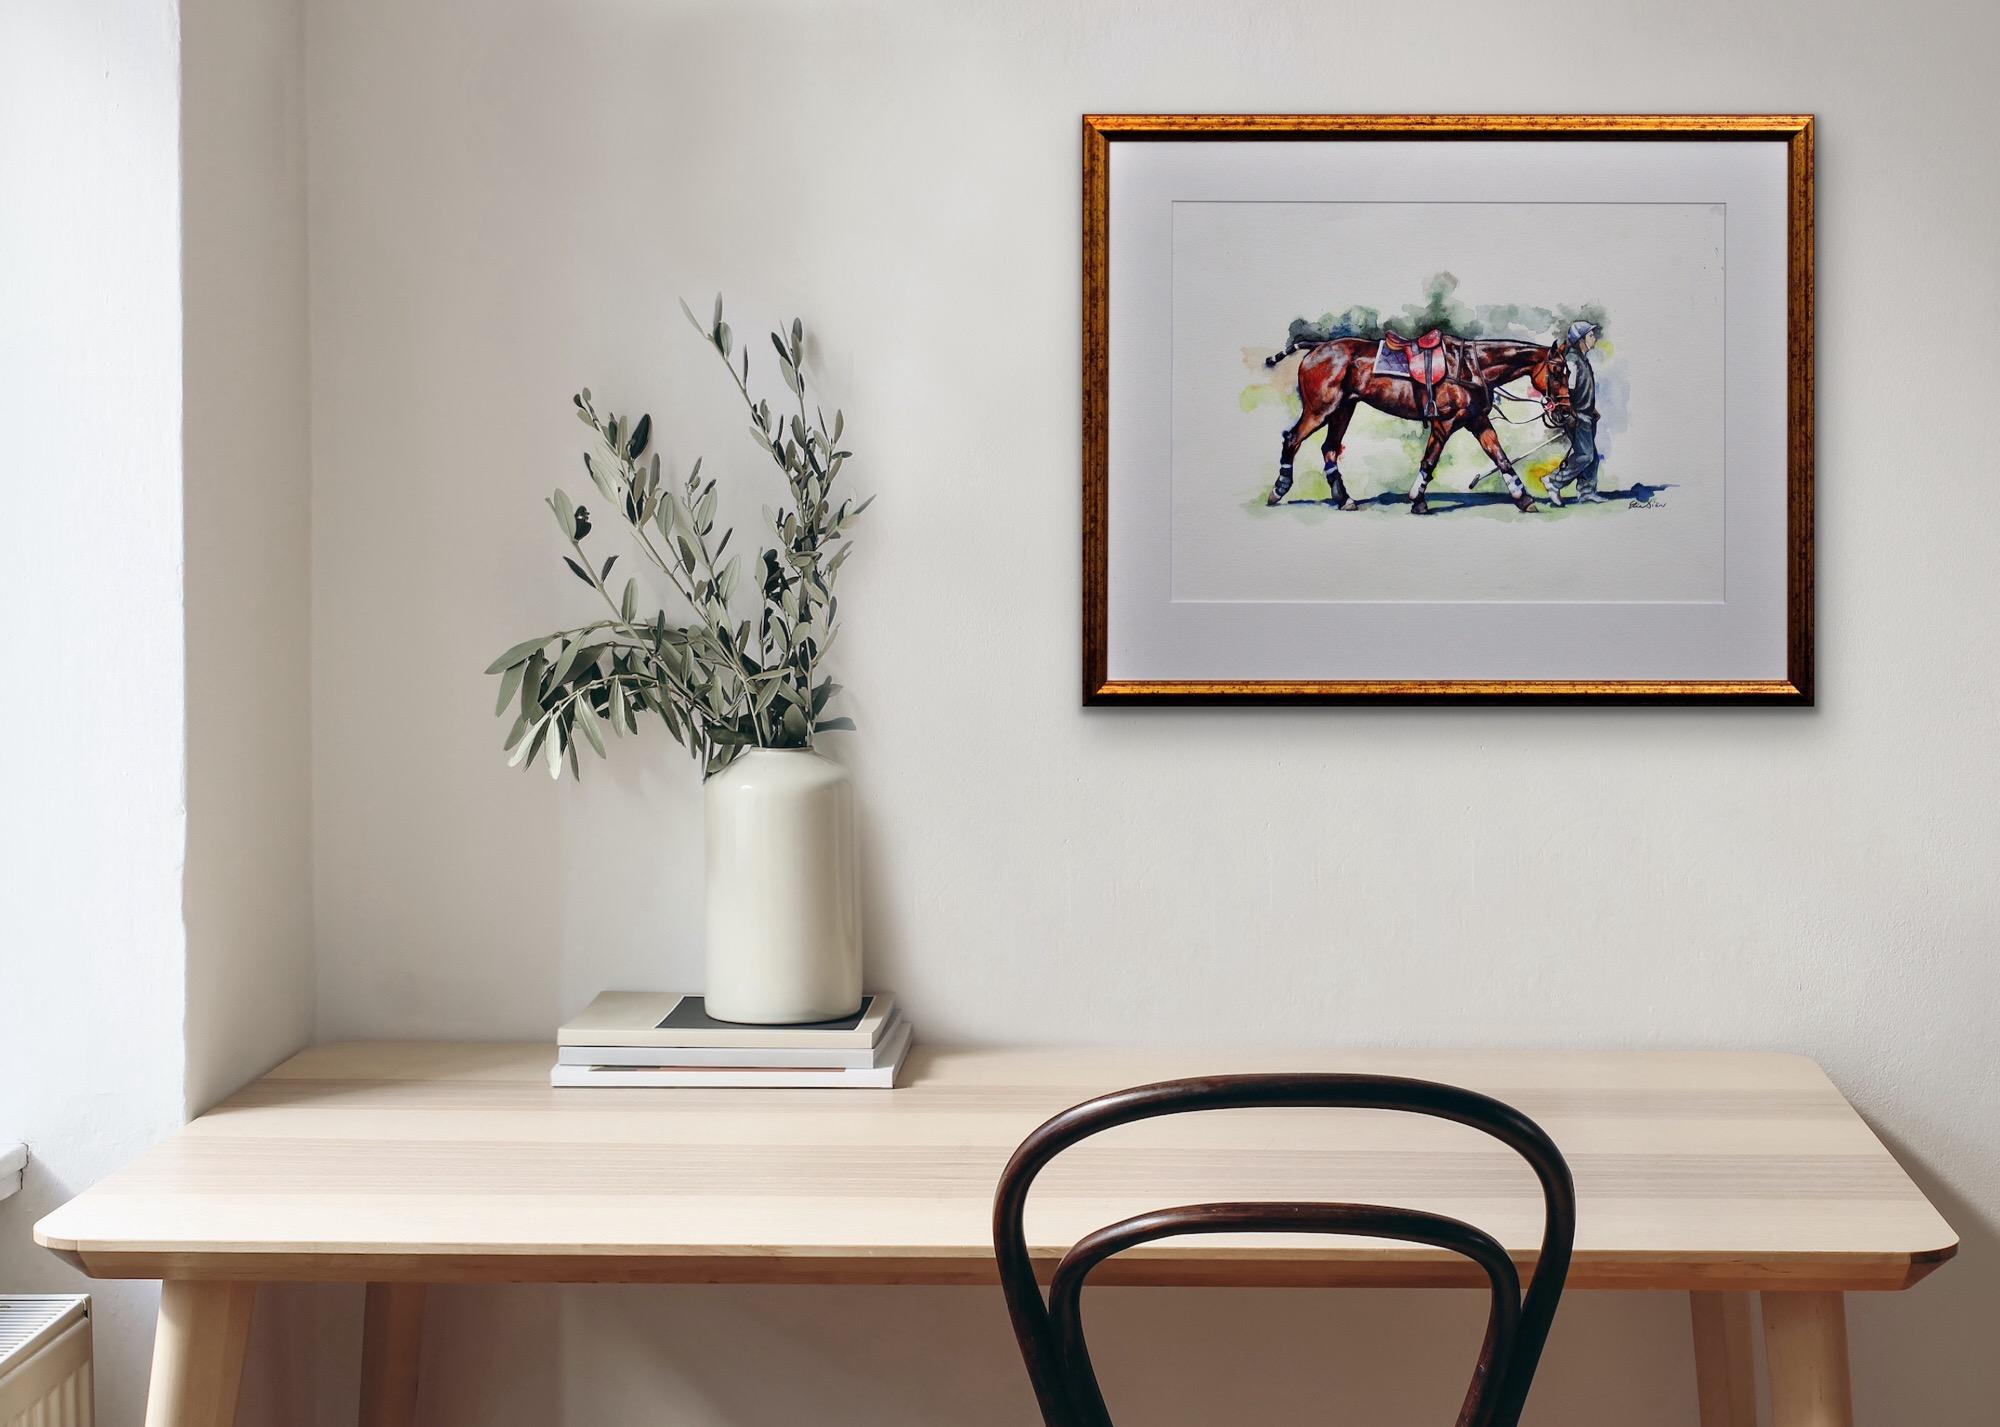 Polo Match, Cirencester, Player Leading Pony. Cotswolds. Framed Watercolor. For Sale 8